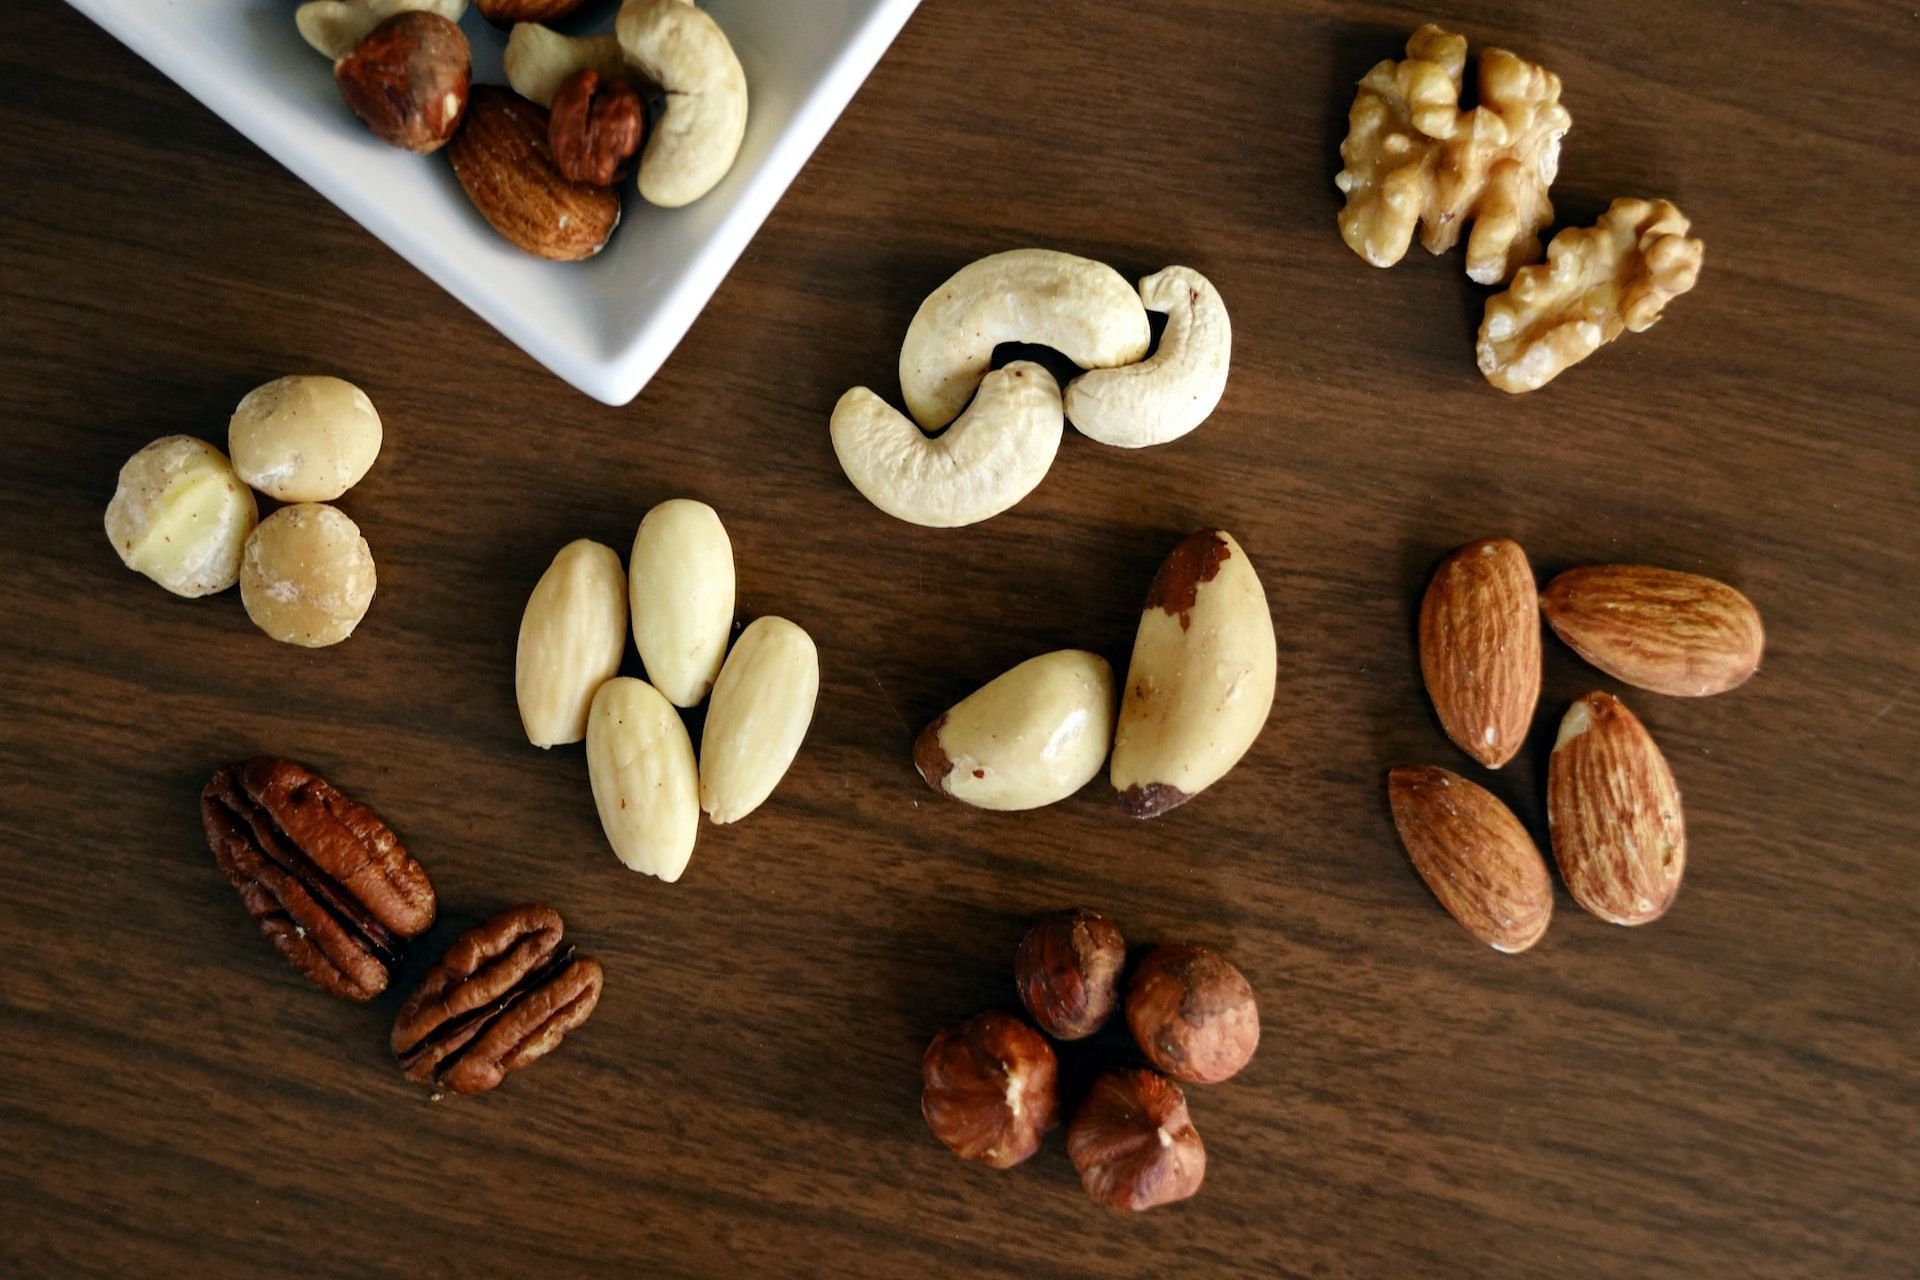 Nuts and seeds are a good source of vitamin E. (Photo via Pexels/Marta Branco)